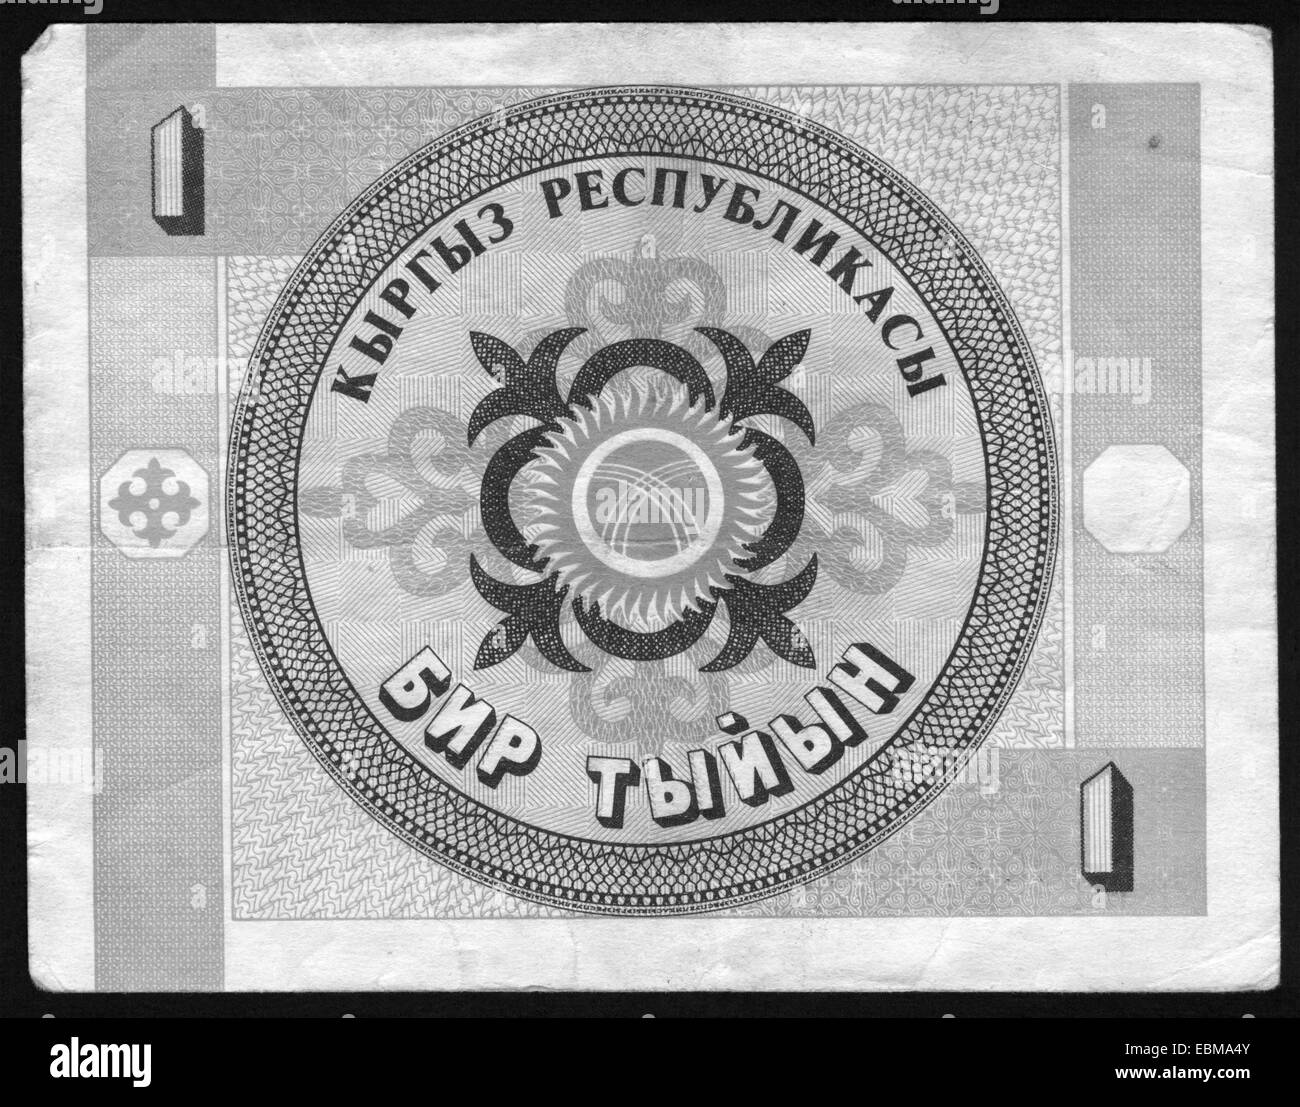 Kyrgyzstan Banknote Hi Res Stock Photography And Images Alamy